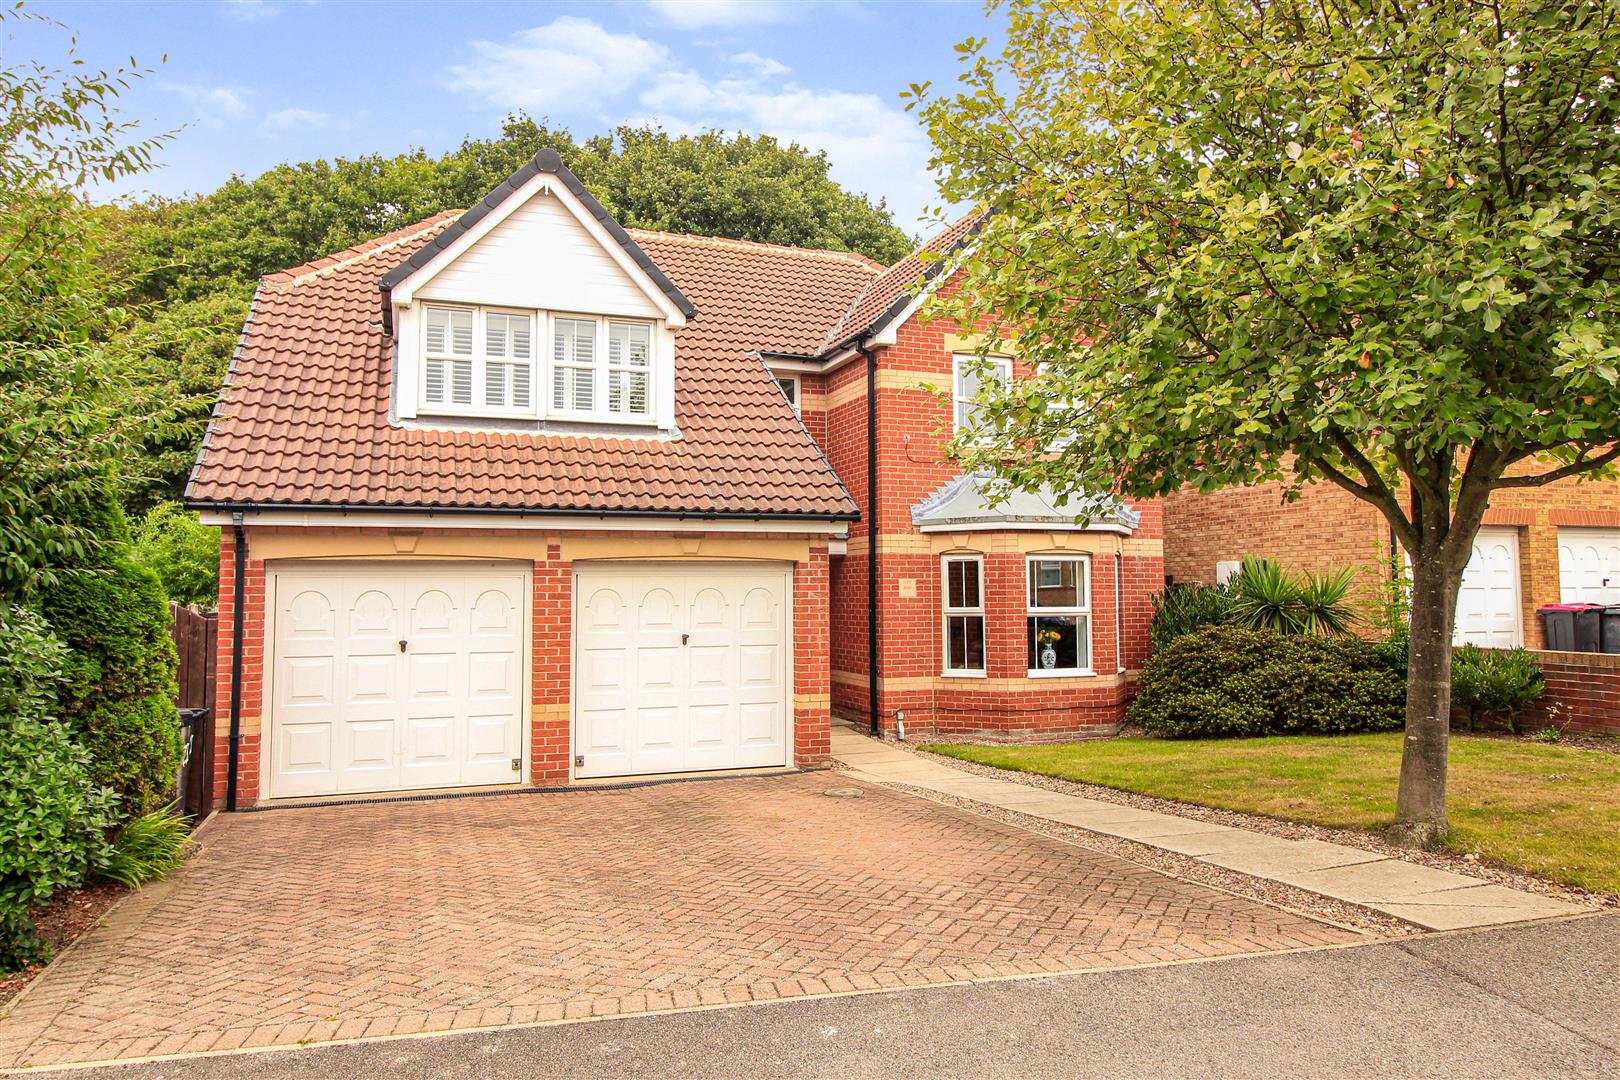 4 bed detached house for sale in Green Bank Drive, Rotherham - Property Image 1